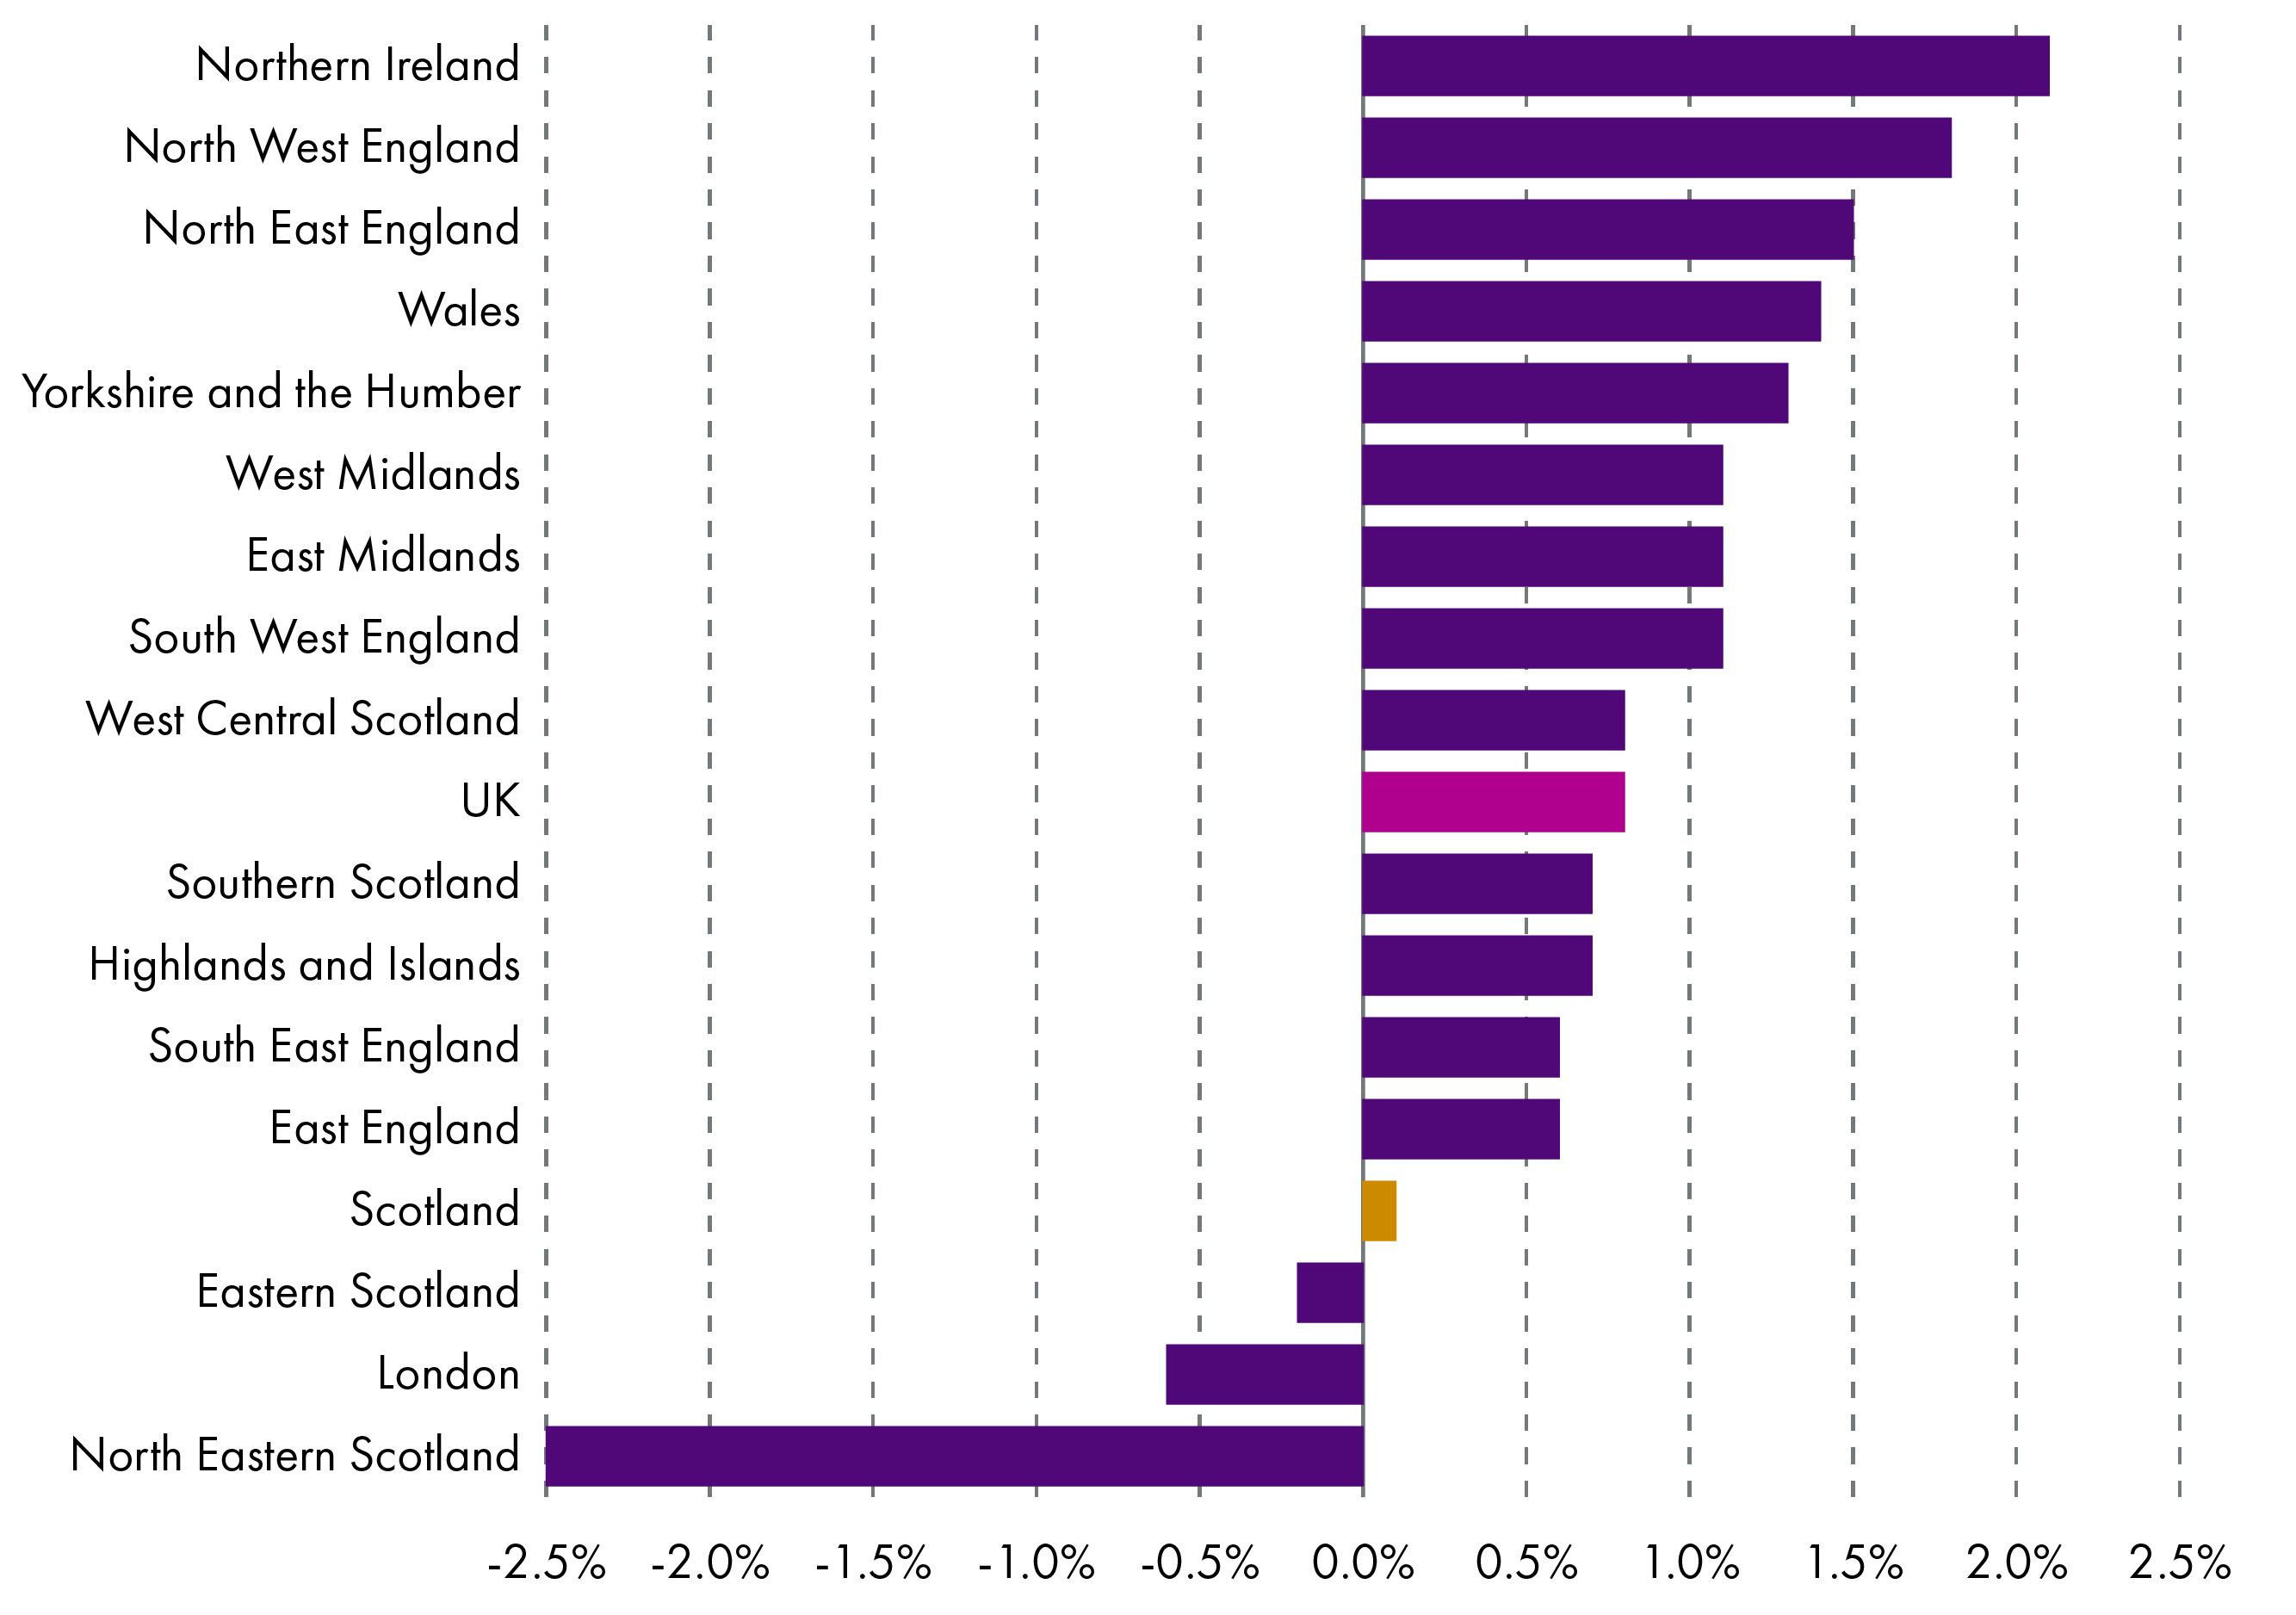 Figure 10 shows SFC analysis of PAYE data and shows a large fall in PAYE employees in North Eastern Scotland compared to other nations and regions in the UK.